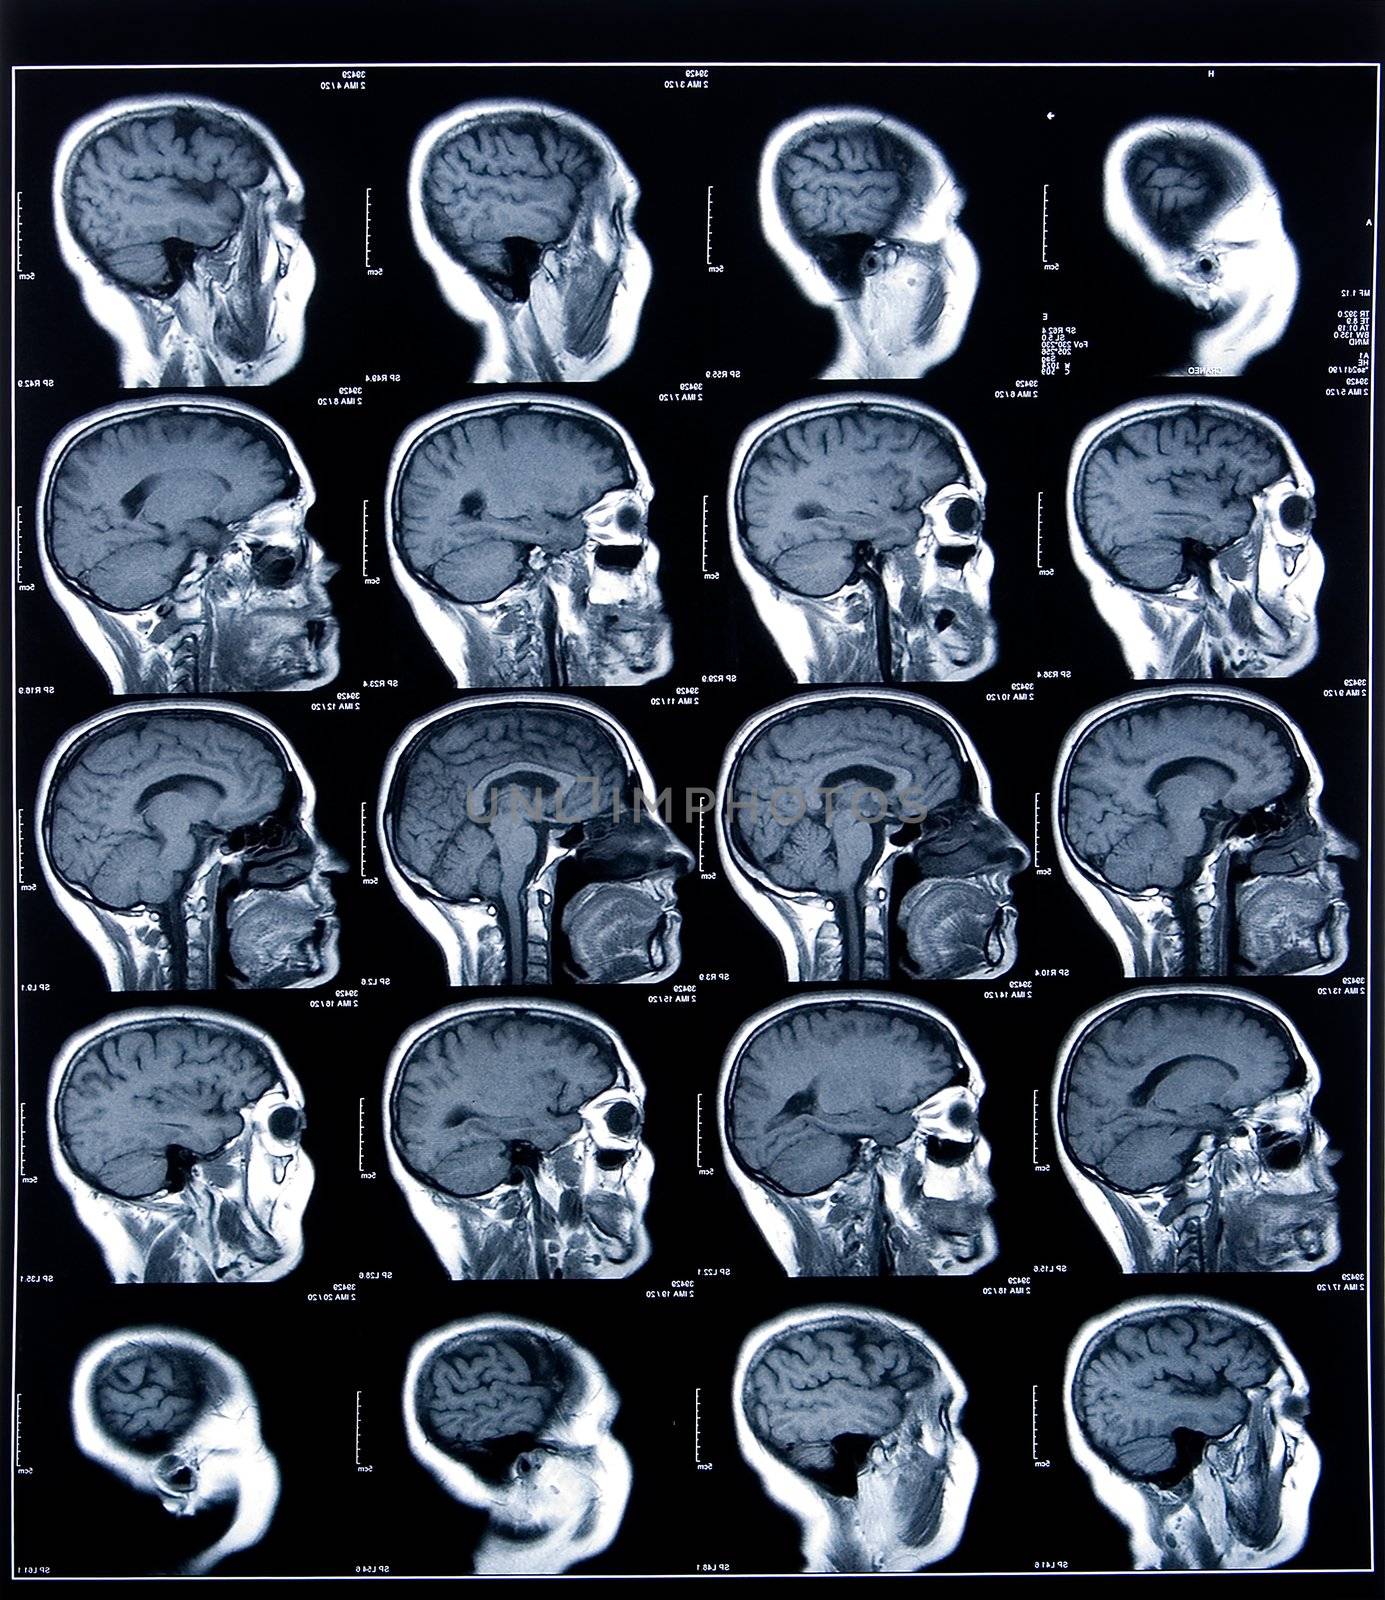 health medical image of an mri of the head showing the brain